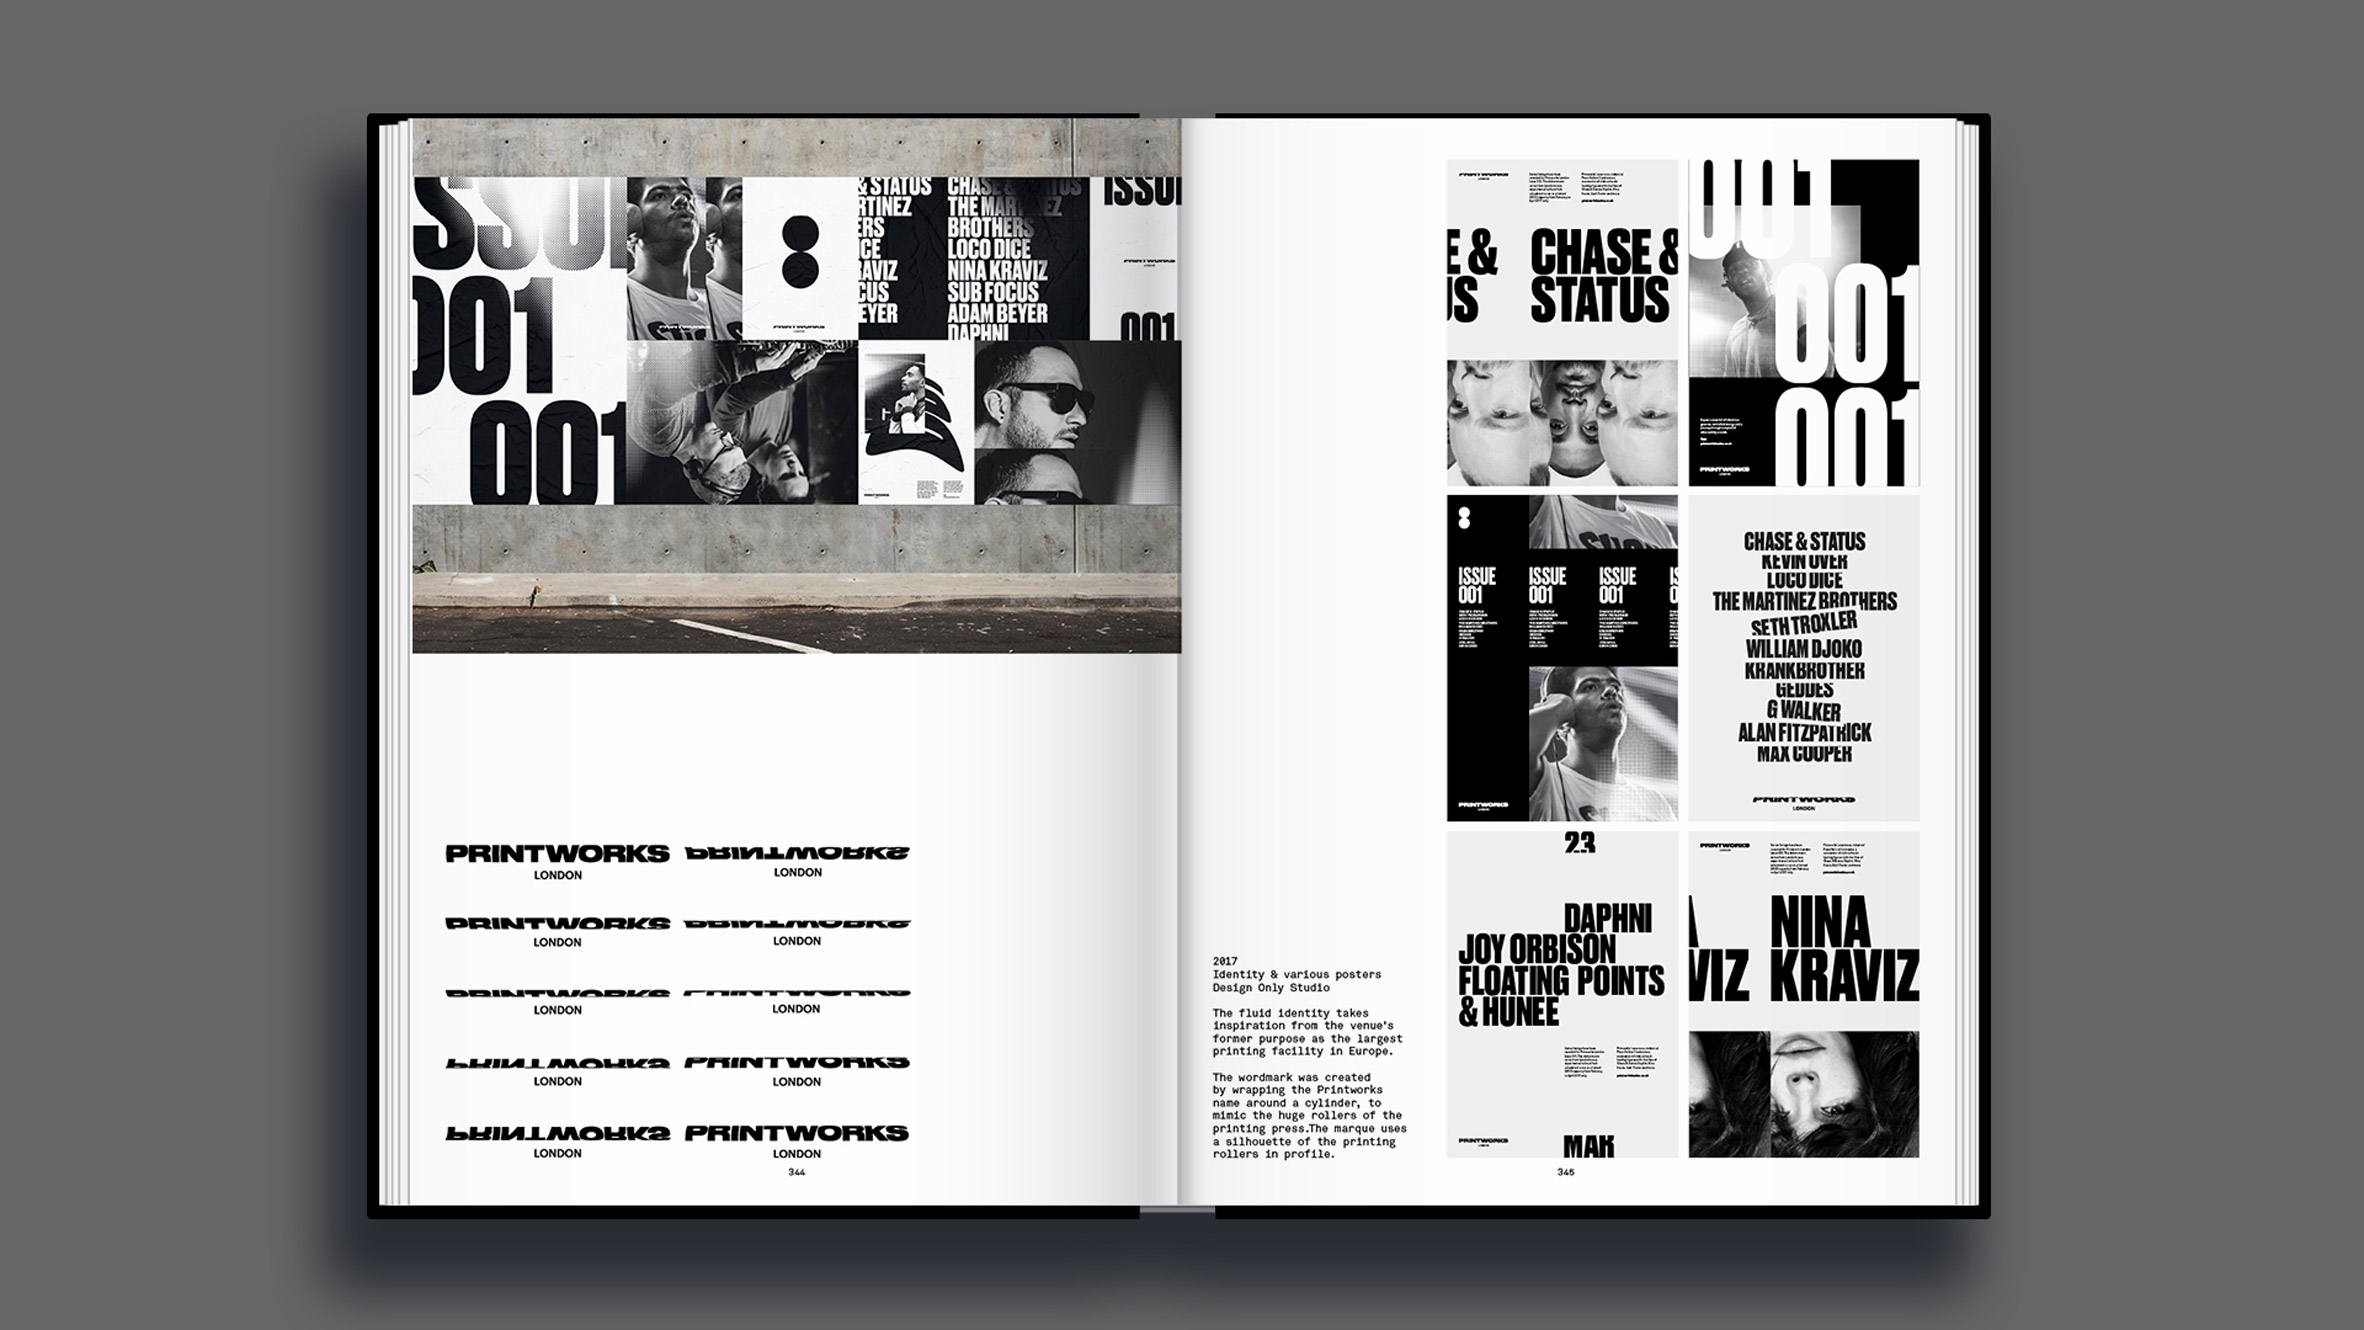 Manchester-based graphic designer Rick Banks has compiled a visual history of the best graphic design in Britain's nightlife from the last 35 years.